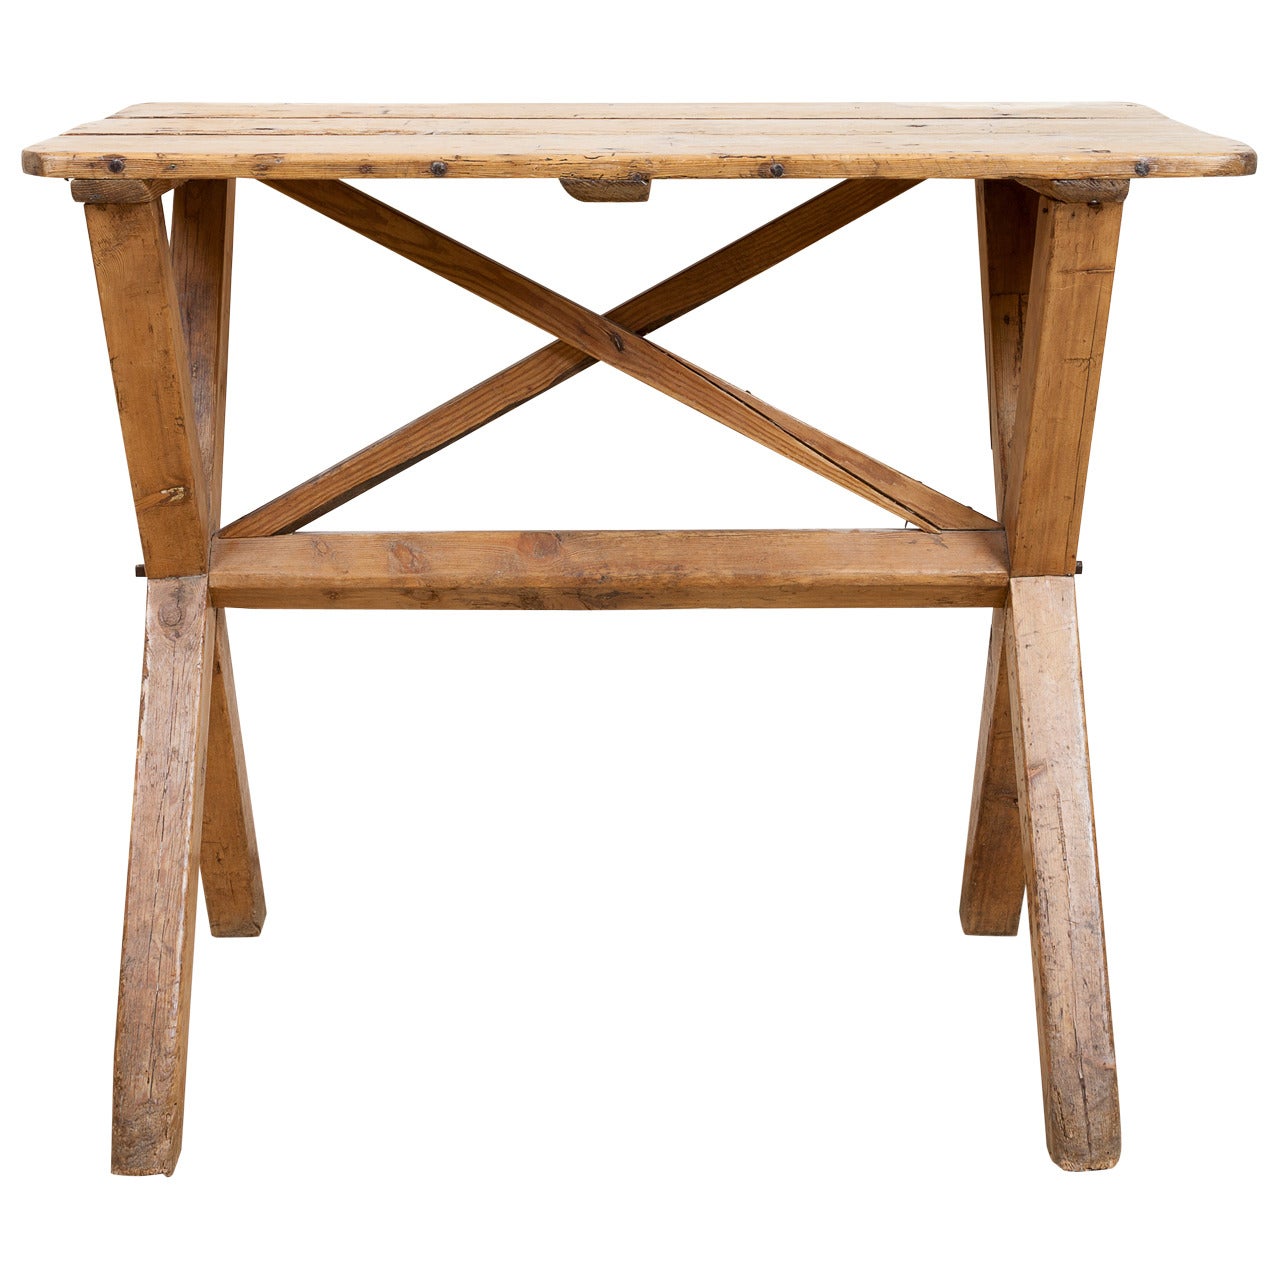 Late 19th Century Trestle Work Table